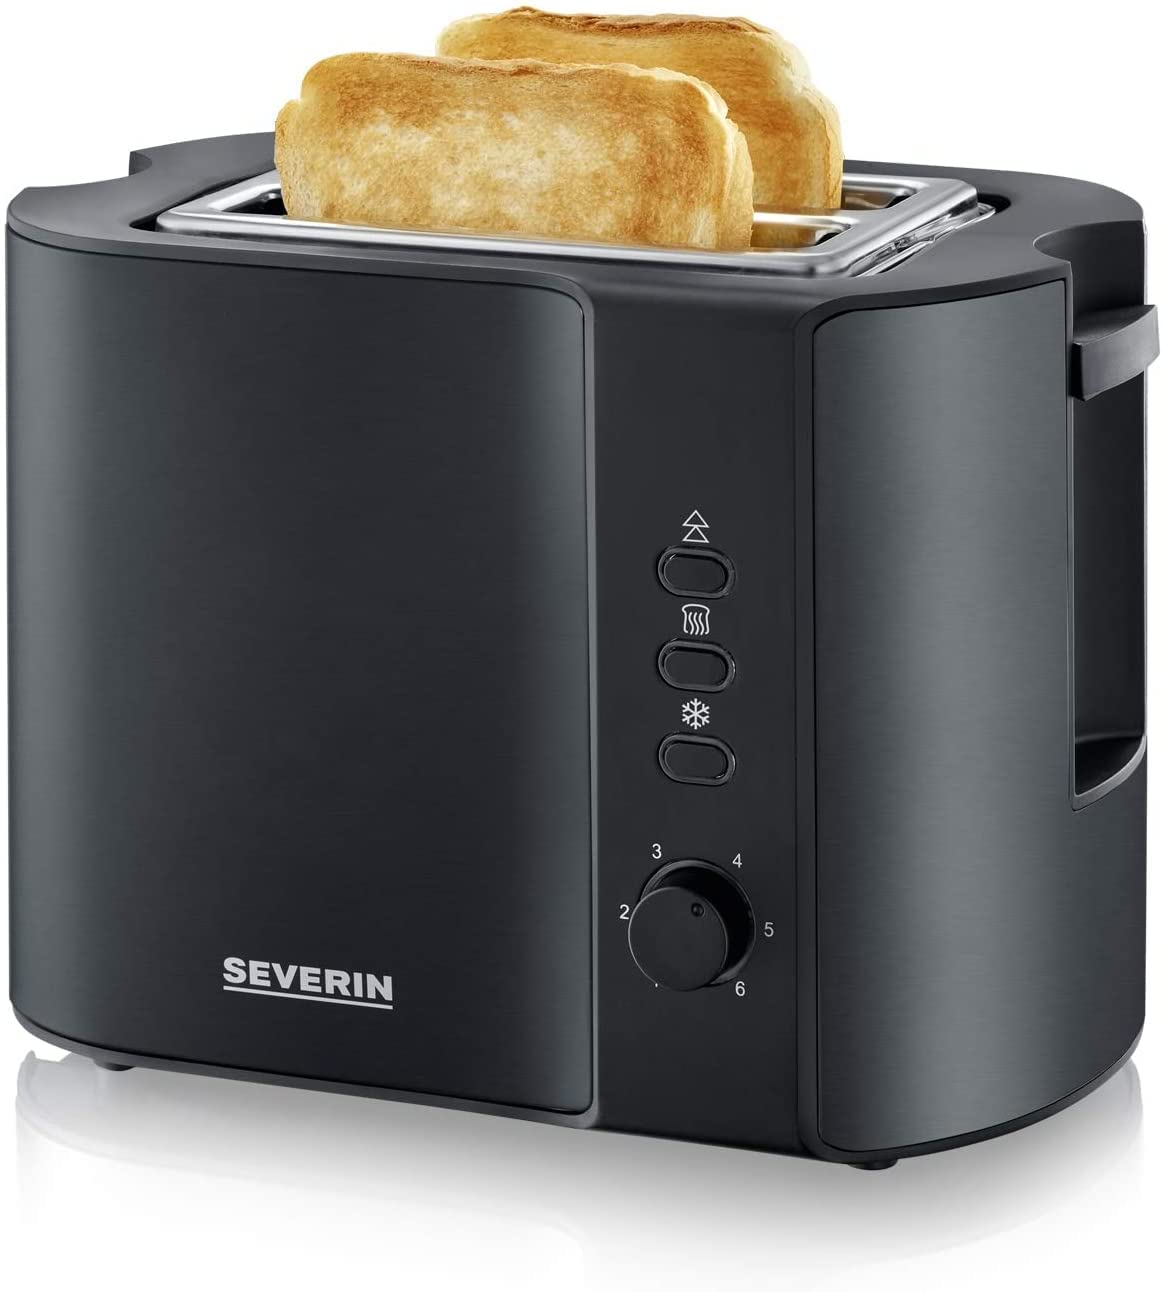 SEVERIN AT 9552 Automatic Toaster (800 W, Includes Bread Roasting Attachment, 2 Roasting Chambers) Black / Matte